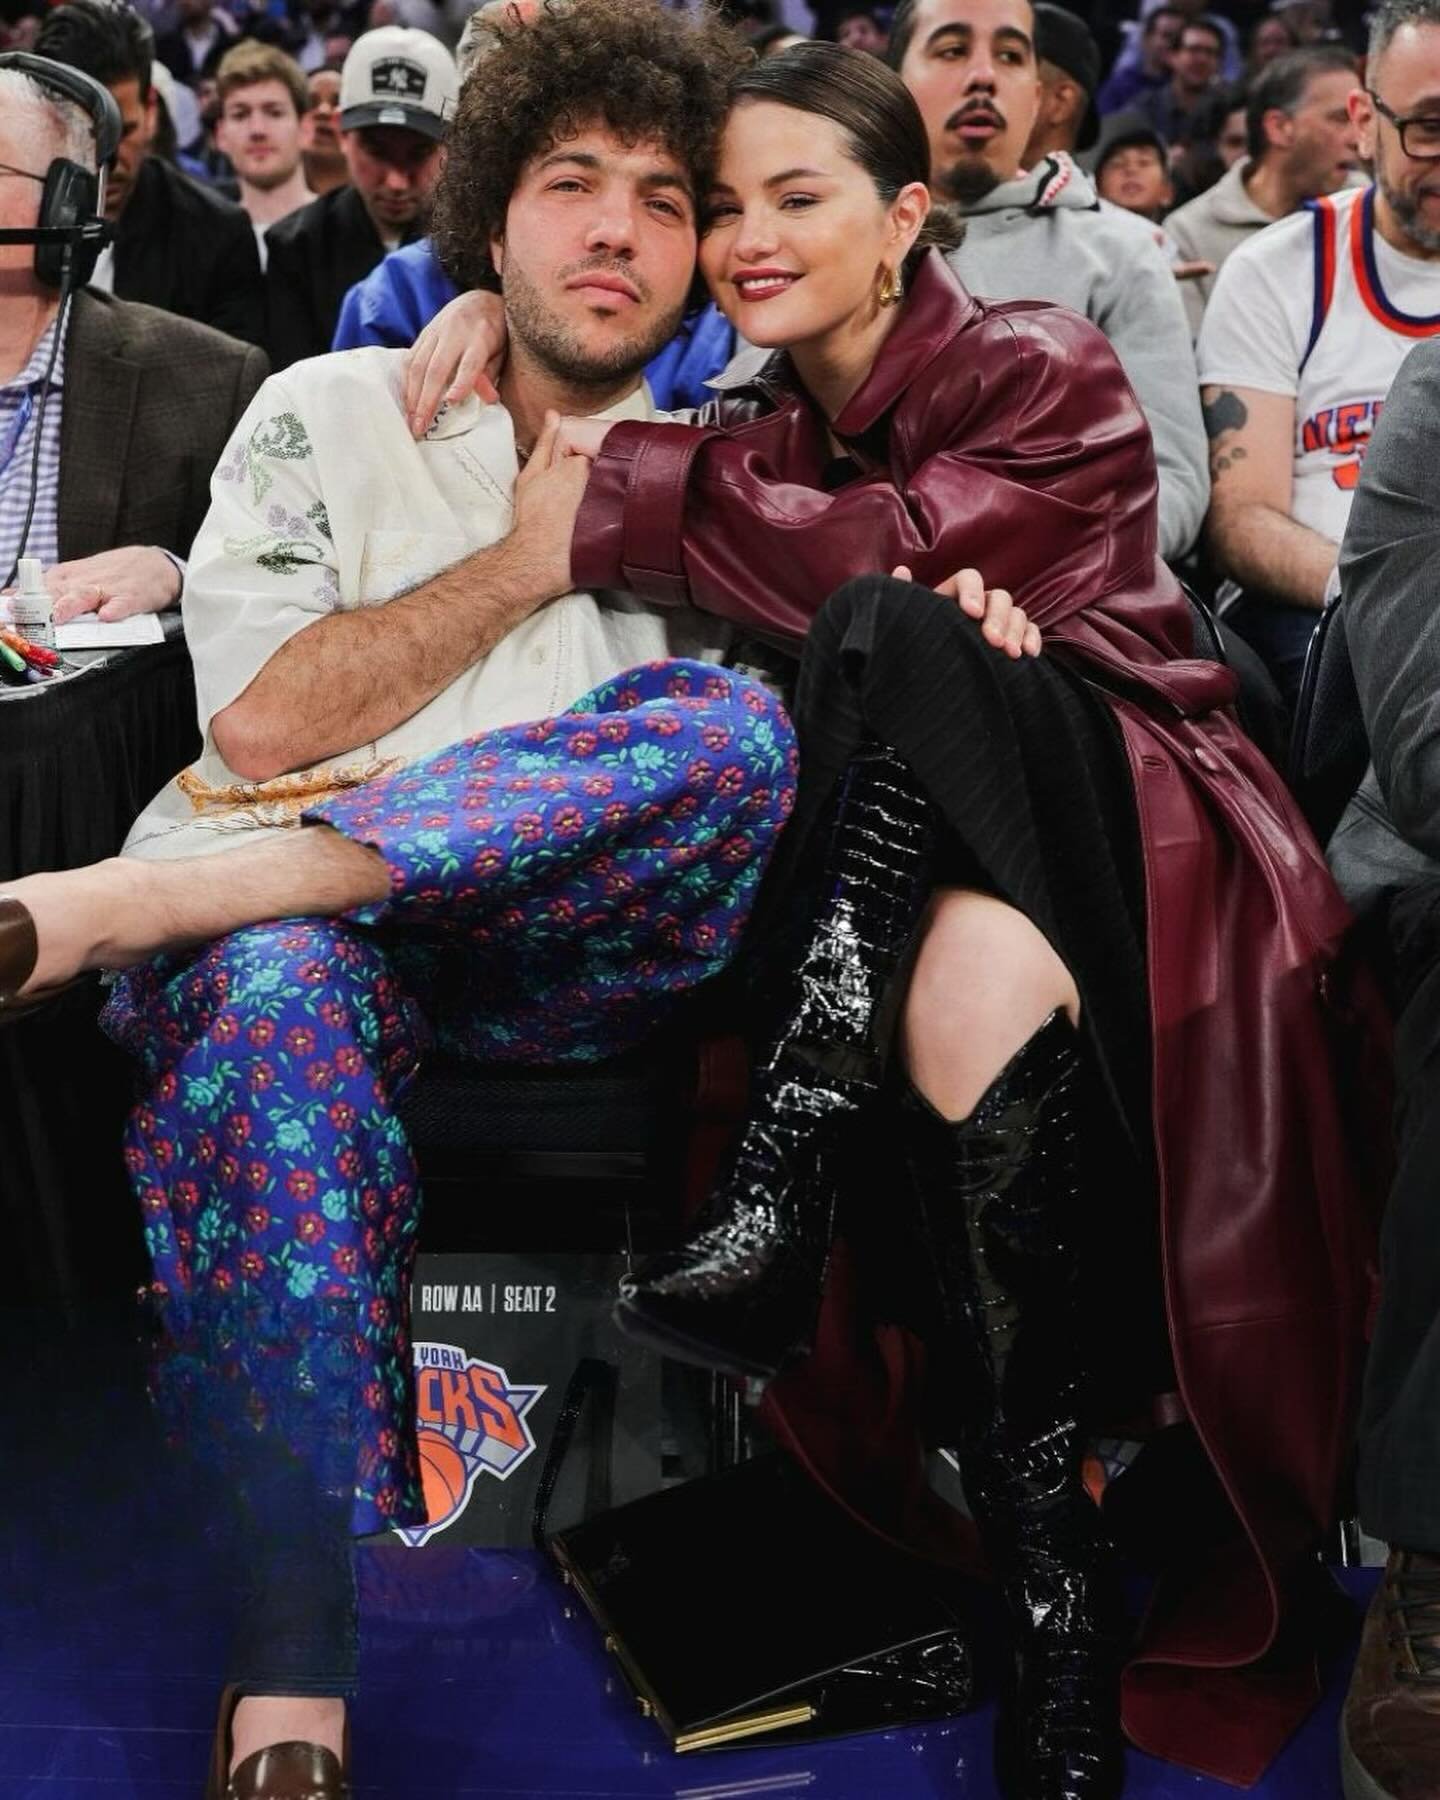 #SelenaGomez in @ducielondon with #bennyblanco for a #Knicks game in NYC &hearts;️ @erinwalshstyle